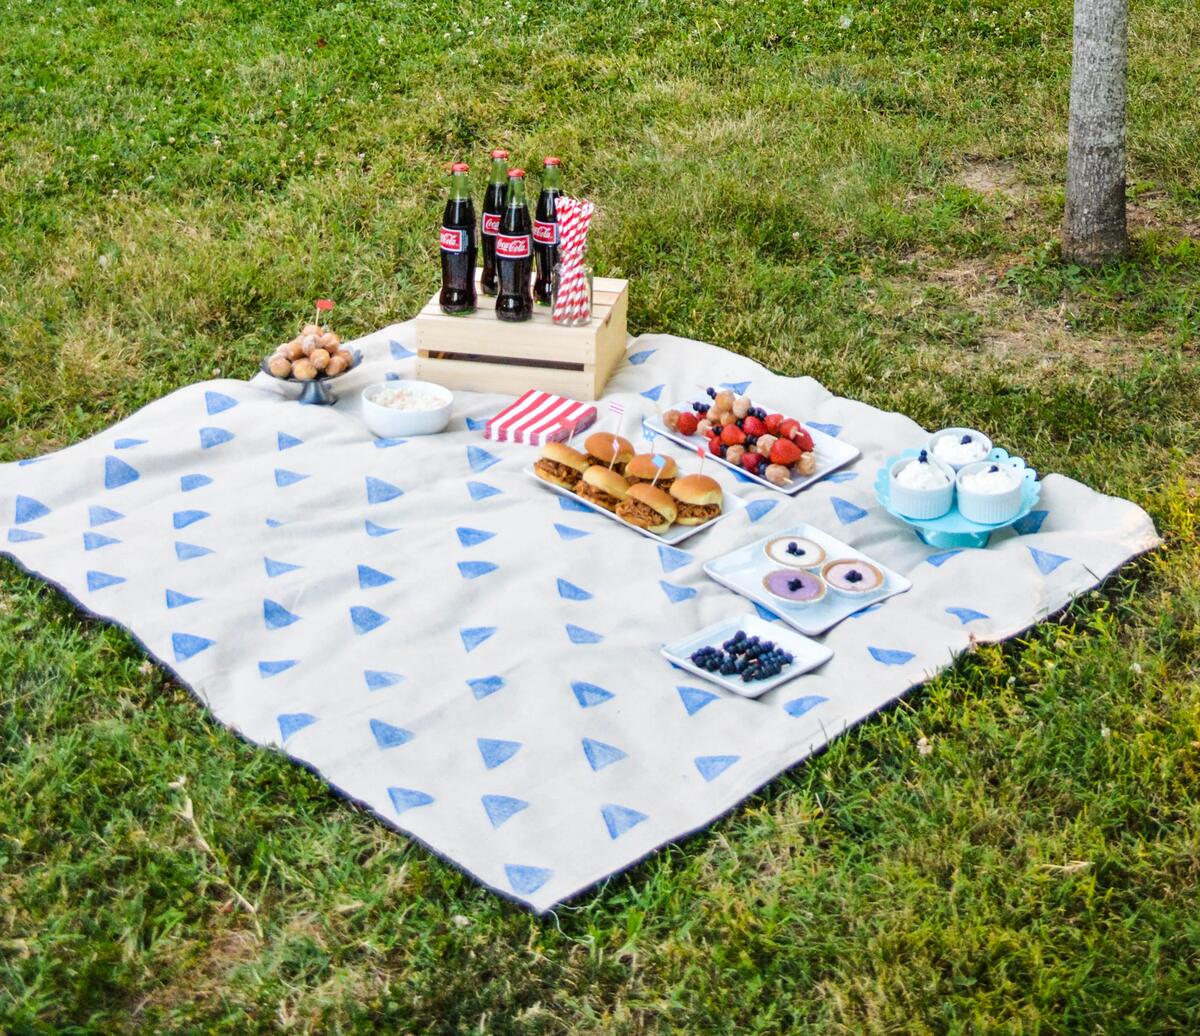 What To Use As A Picnic Blanket